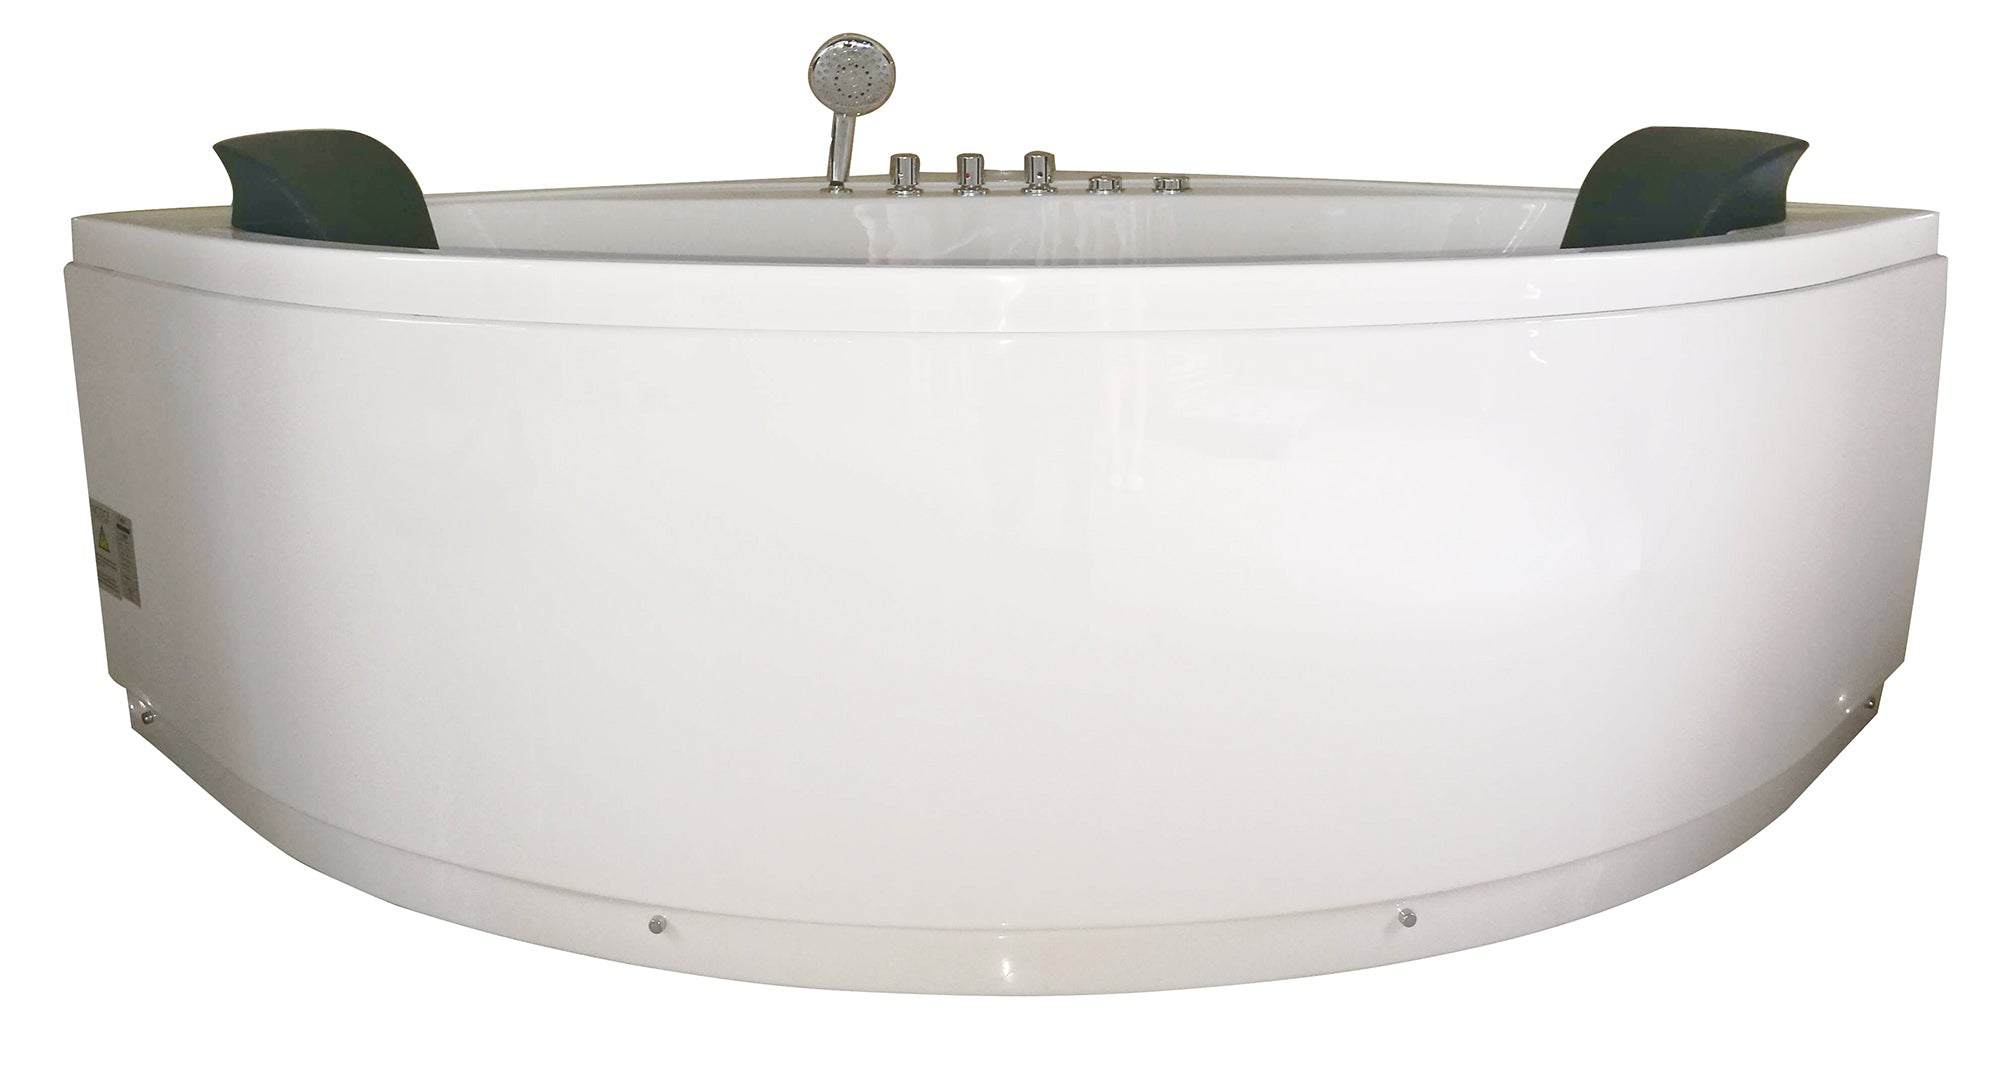 EAGO - 5' Rounded Modern Double Seat Corner Whirlpool Bath Tub with Fixtures | AM200